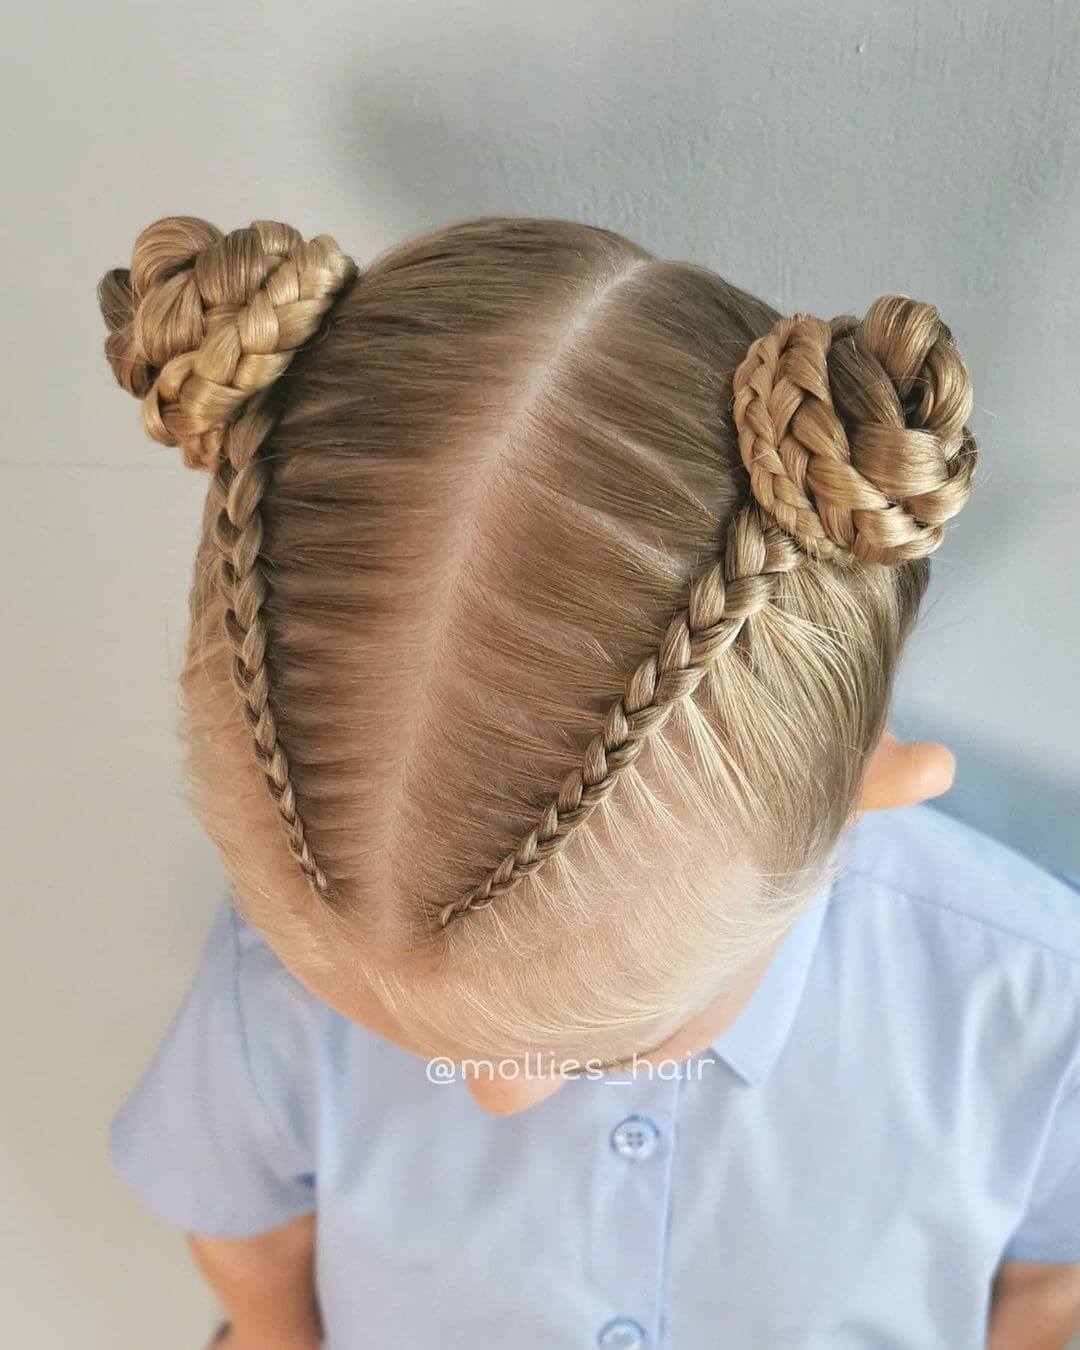 Knotted braided buns for kids